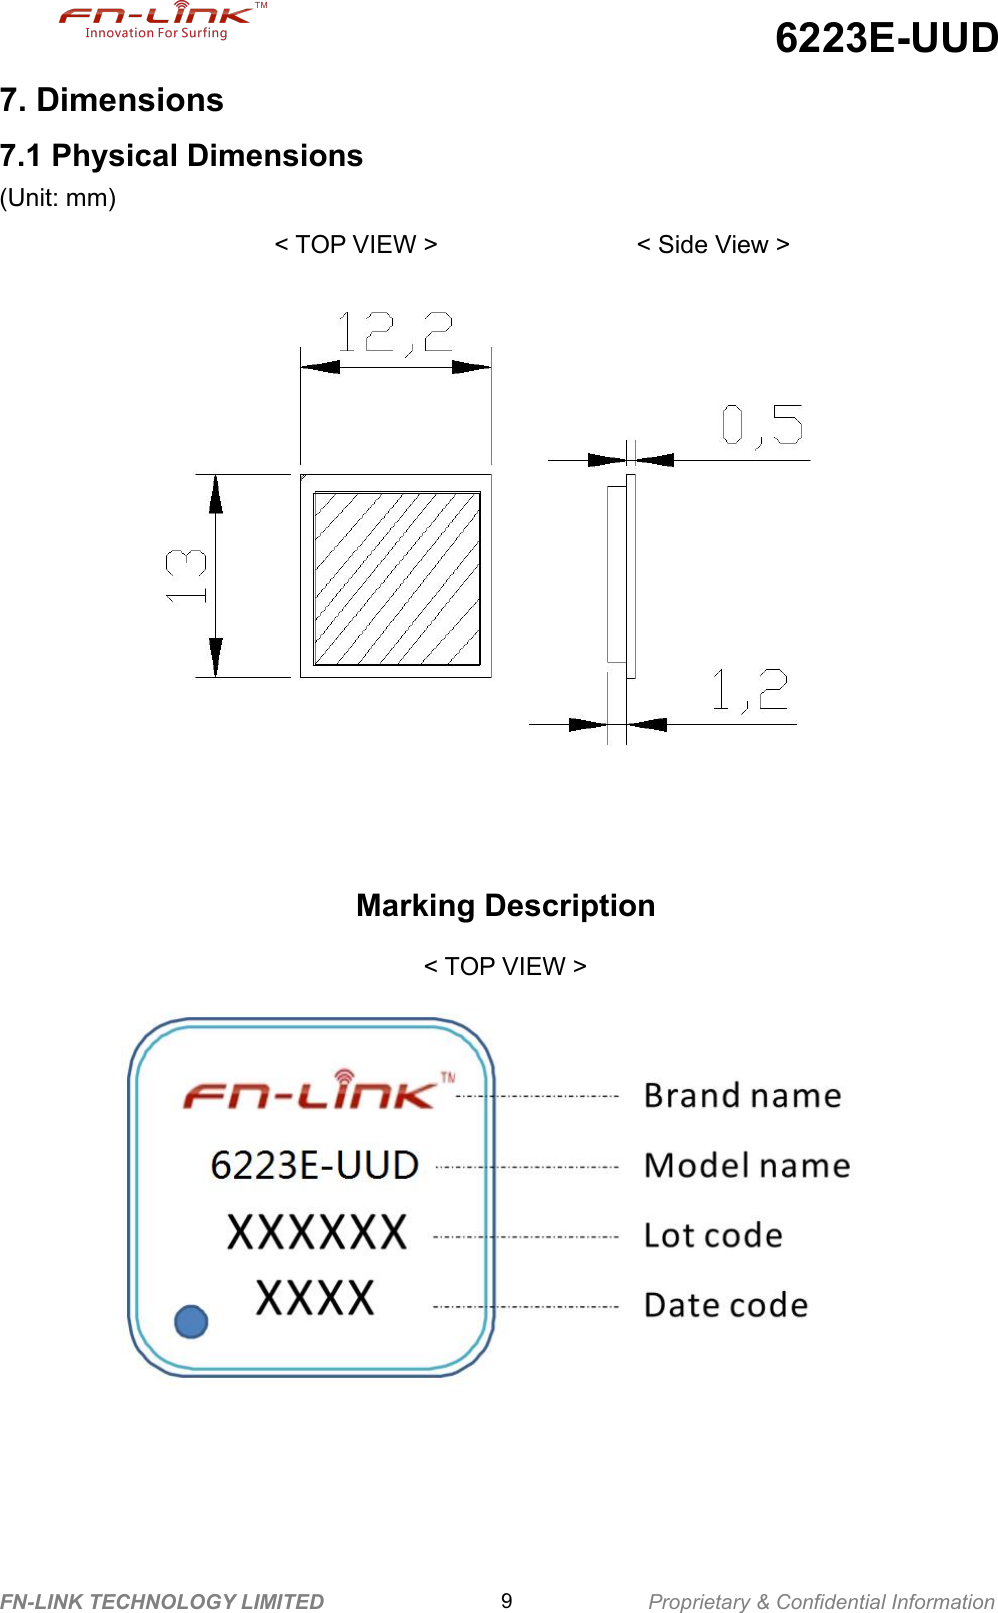 6223E-UUDFN-LINK TECHNOLOGY LIMITED 9Proprietary &amp; Confidential Information7. Dimensions7.1 Physical Dimensions(Unit: mm)&lt; TOP VIEW &gt; &lt; Side View &gt;Marking Description&lt; TOP VIEW &gt;